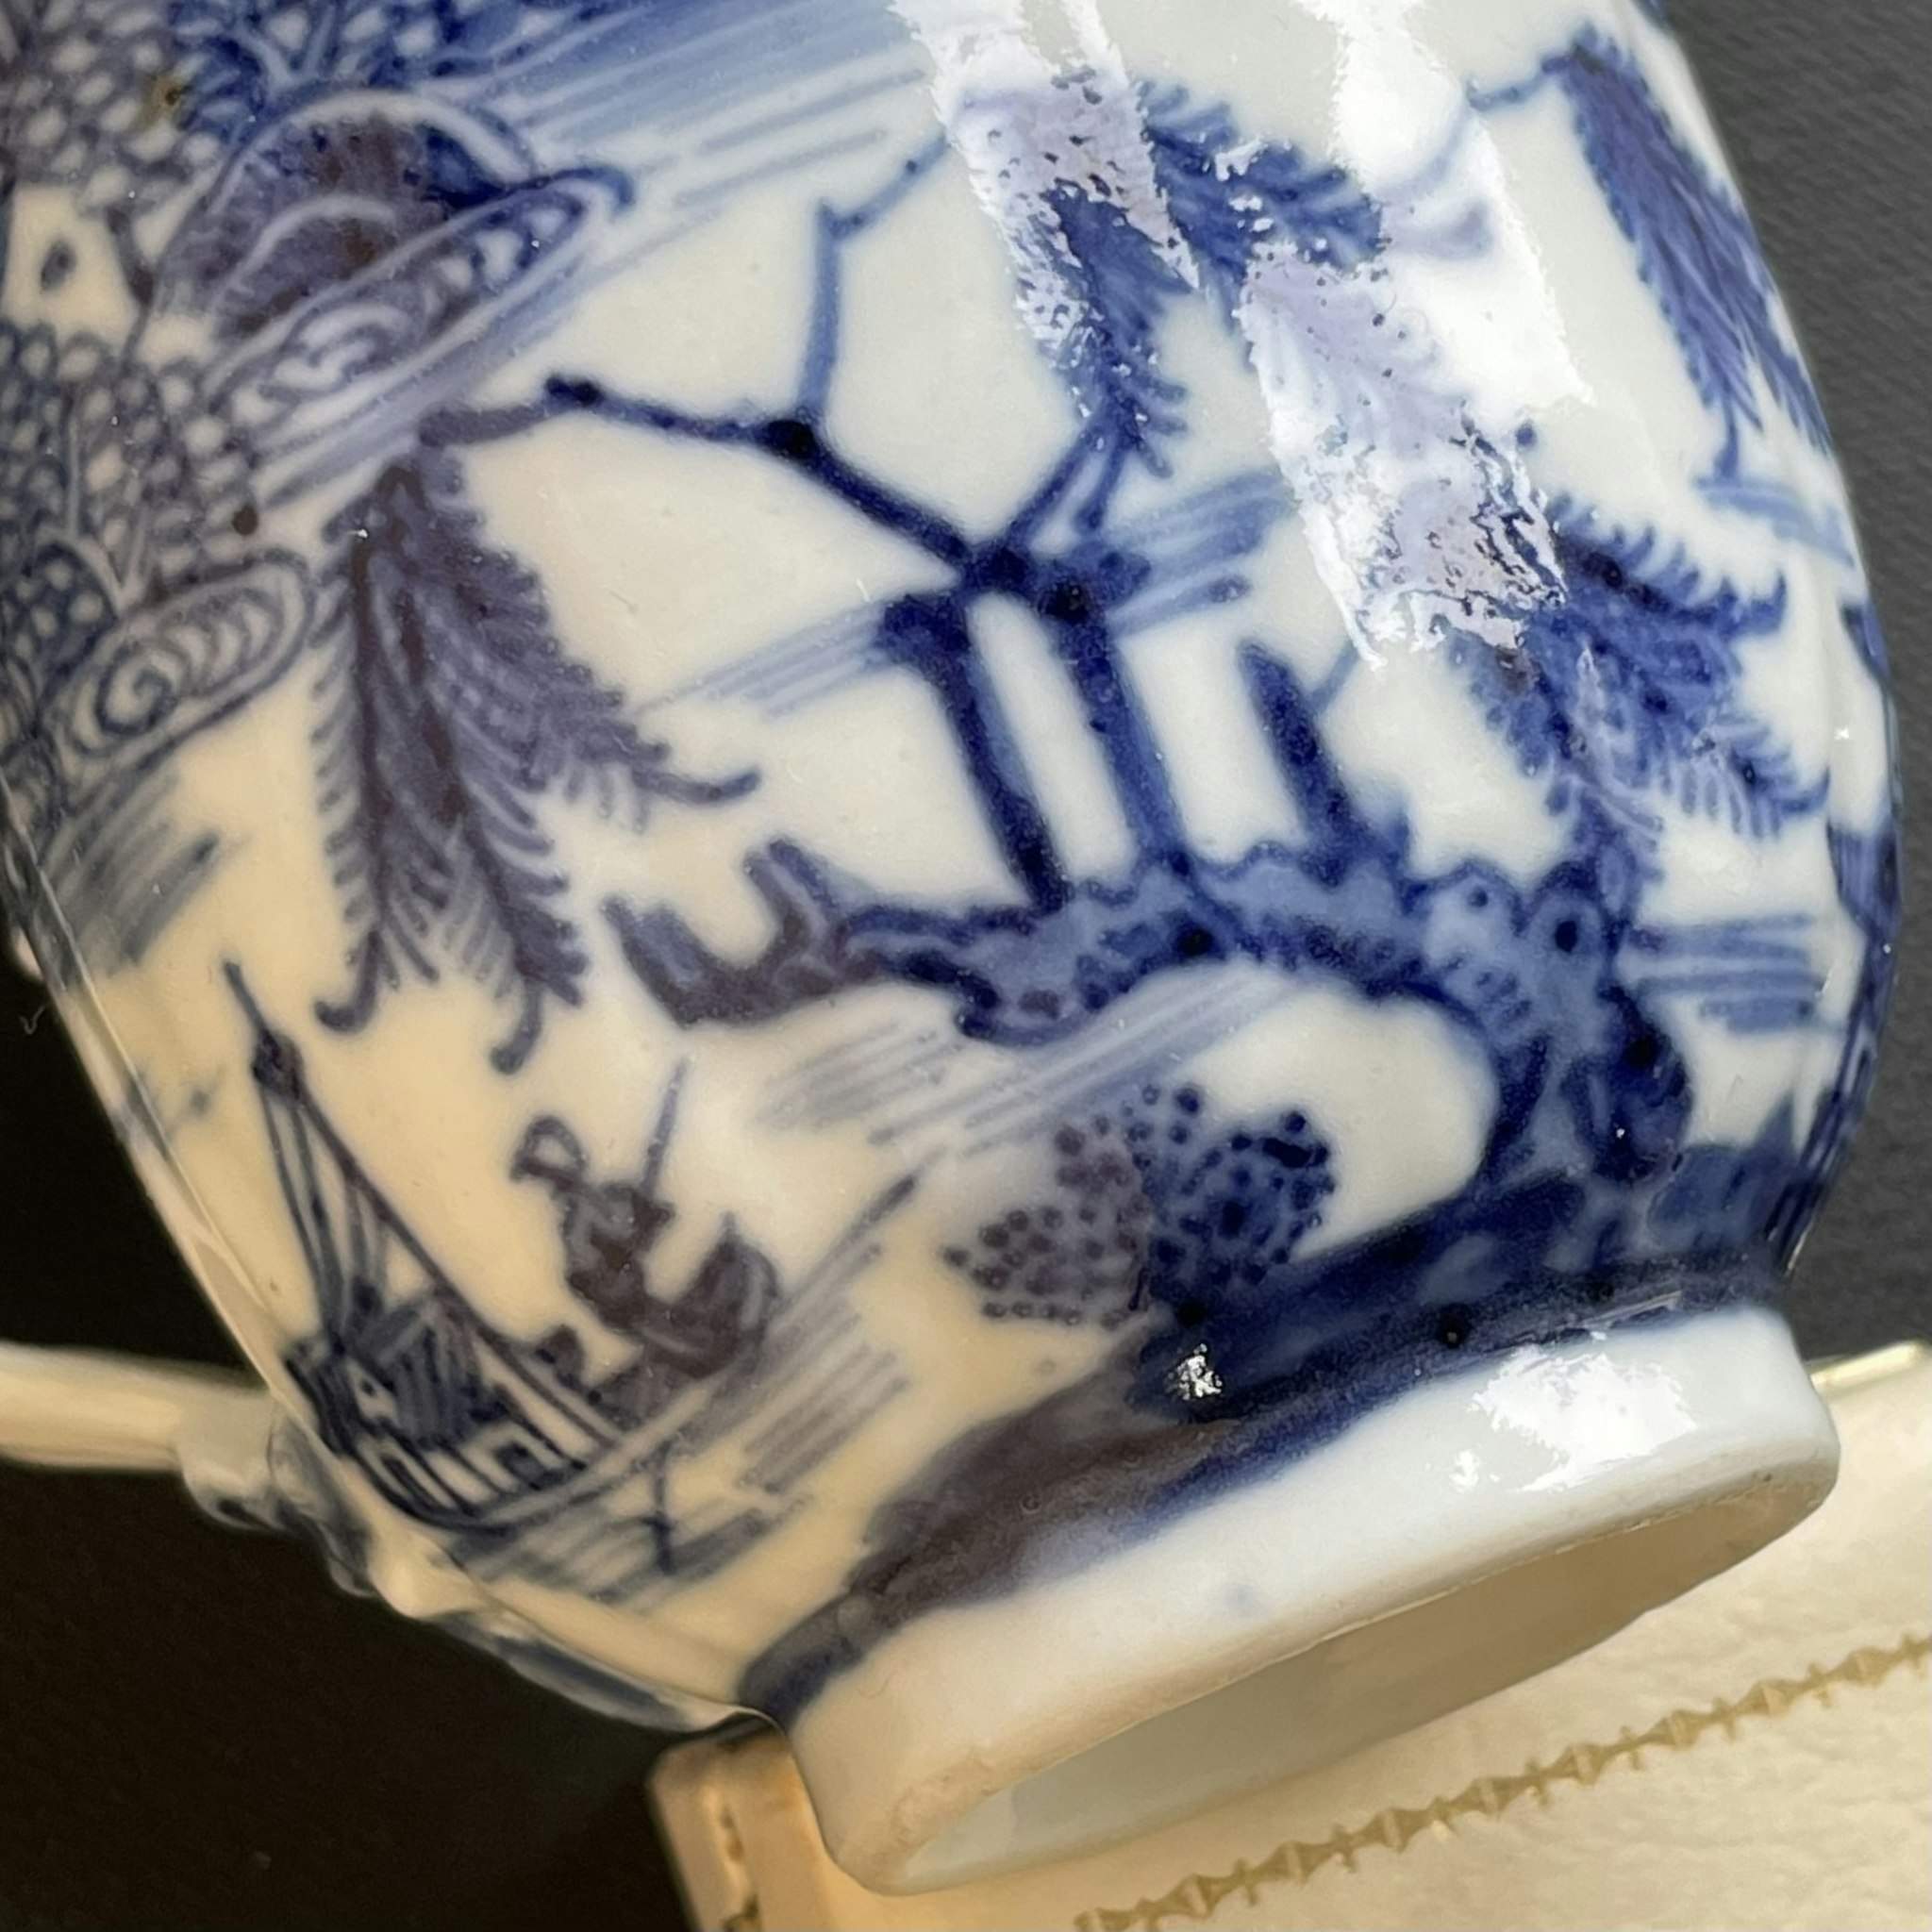 Antique Chinese blue and white Porcelain teacup Qianlong period #1103